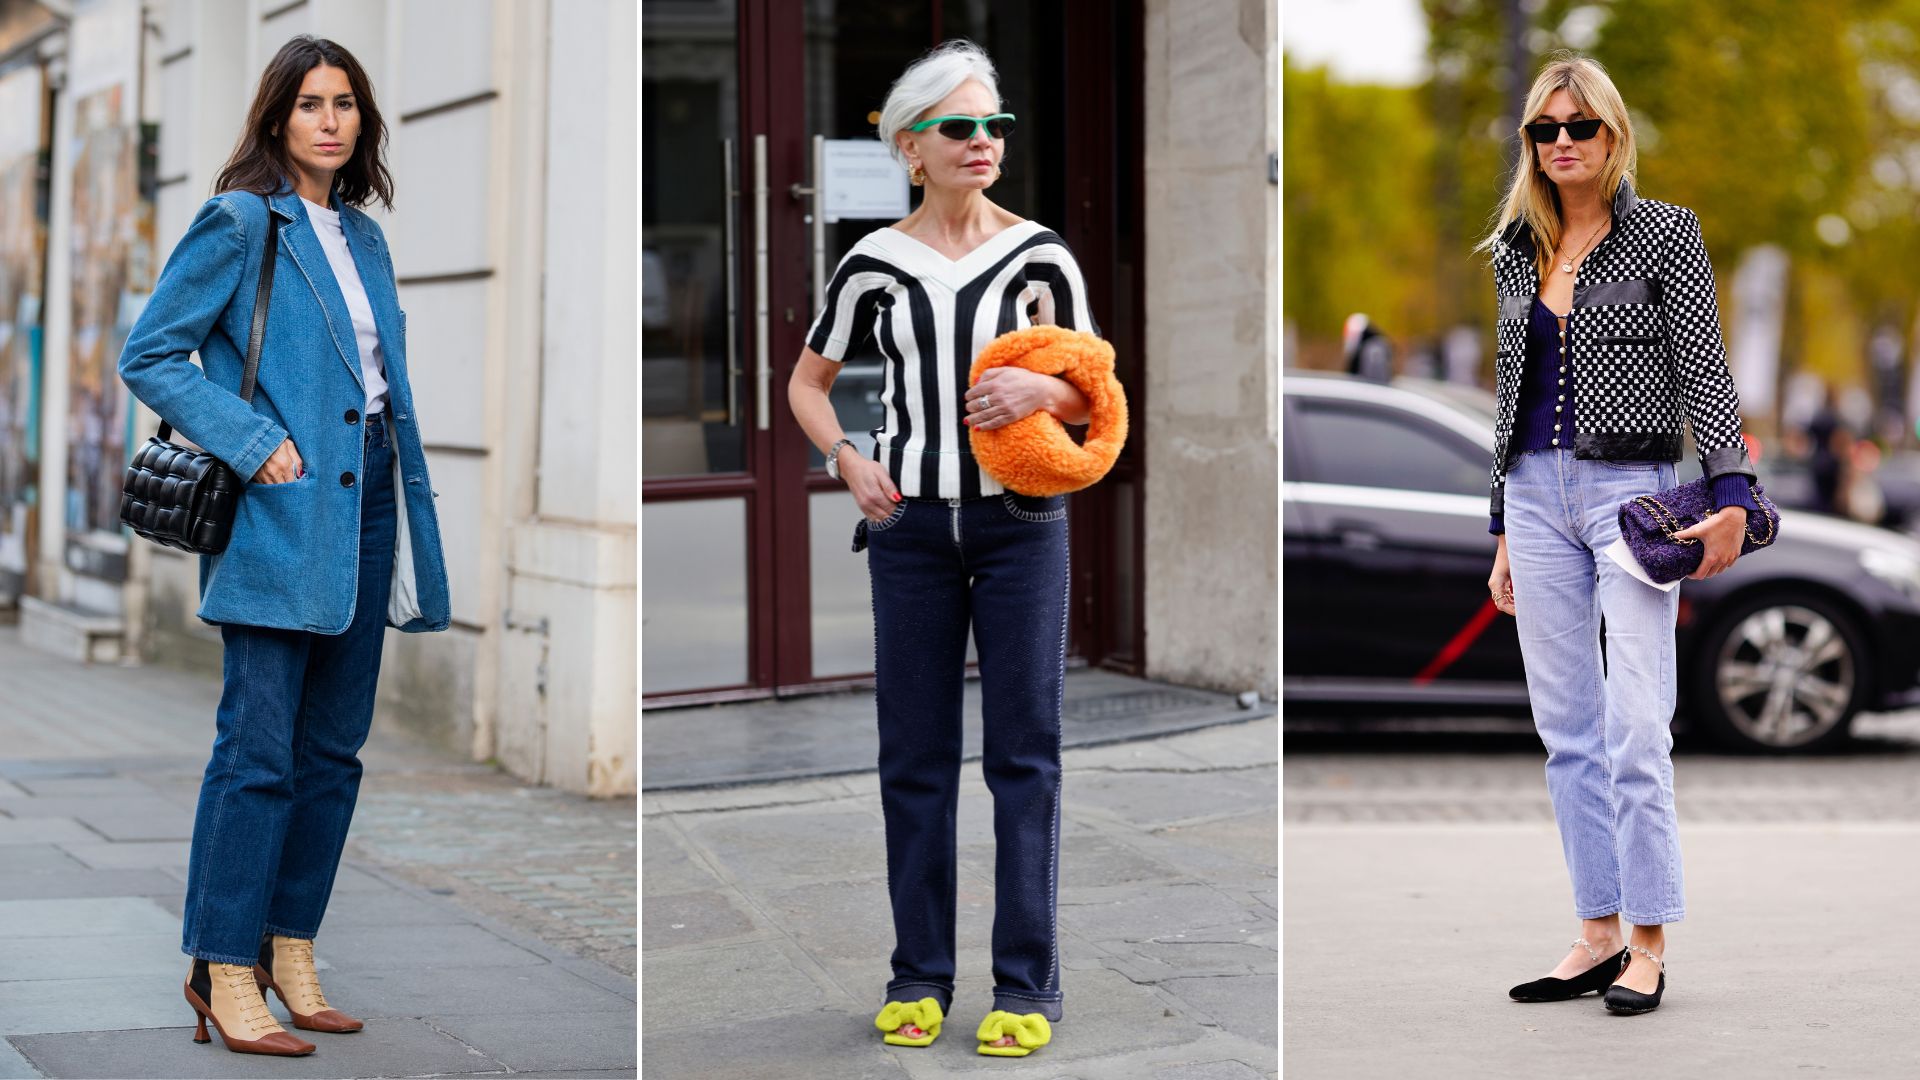 Give your high-waist pants a street-style worthy twist with a